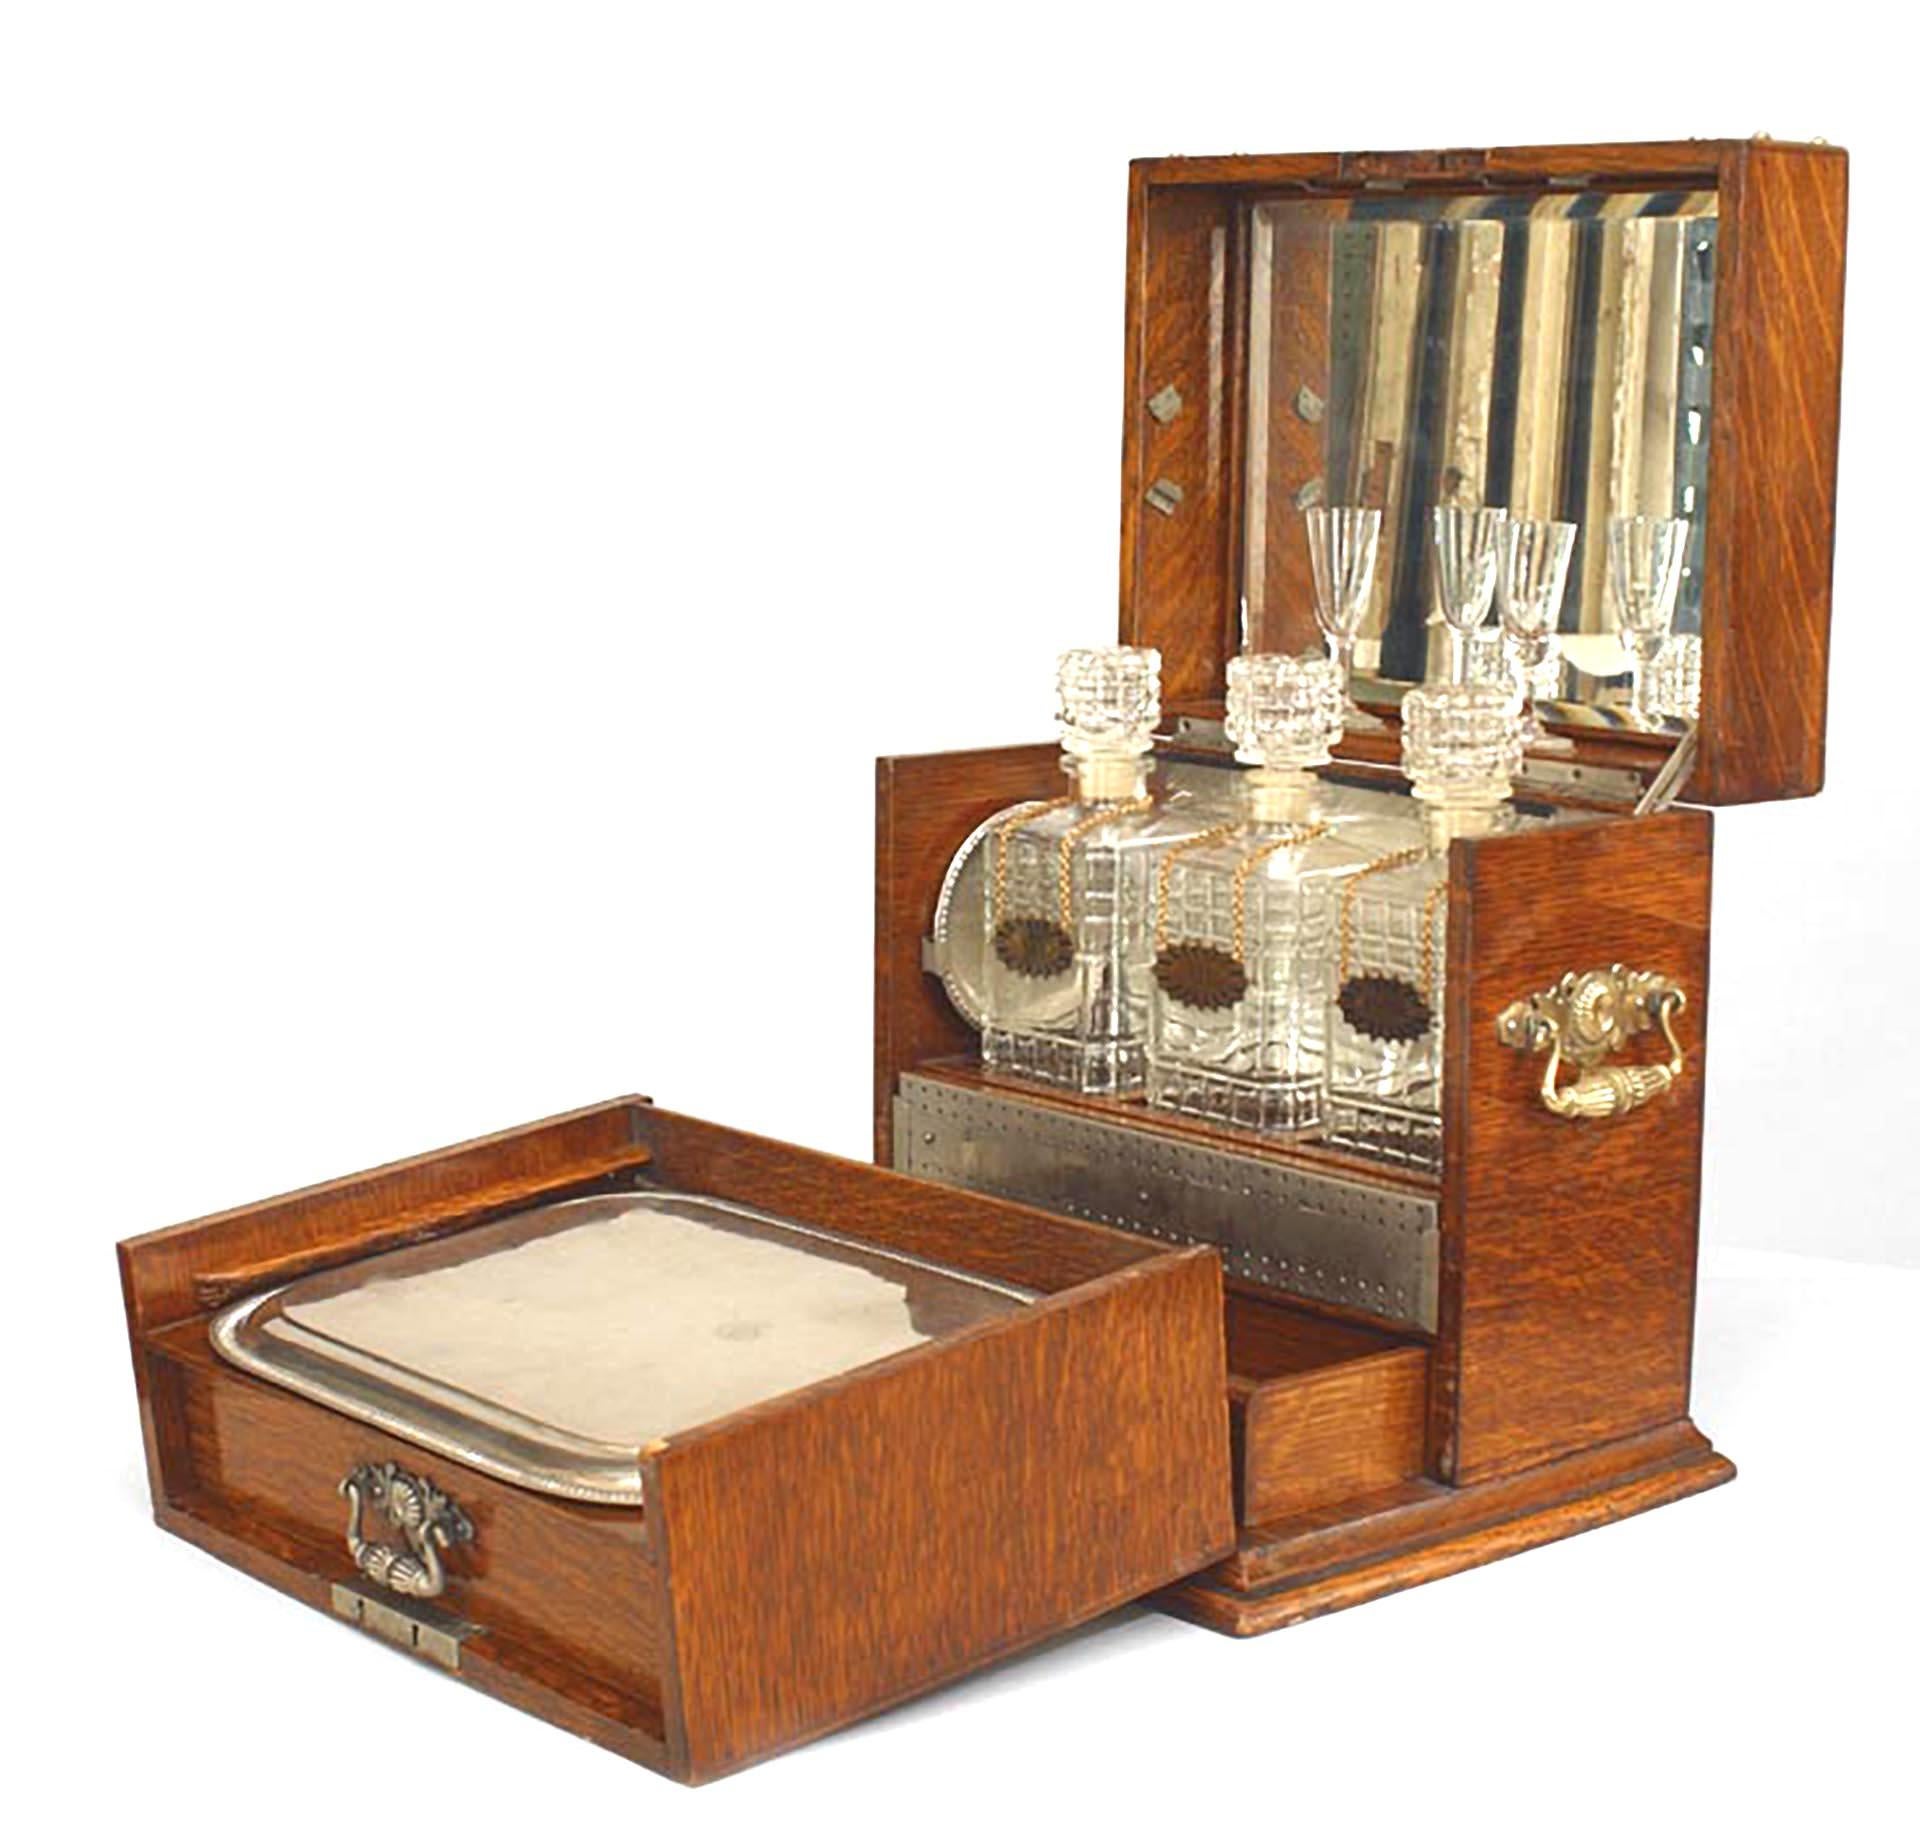 English Victorian oak traveling tantalus box with brass filigree trimmed corners, handles, and trim (silver plate tray & 2 coasters, 2 cordial glasses, 3 pressed glass bottles).
 